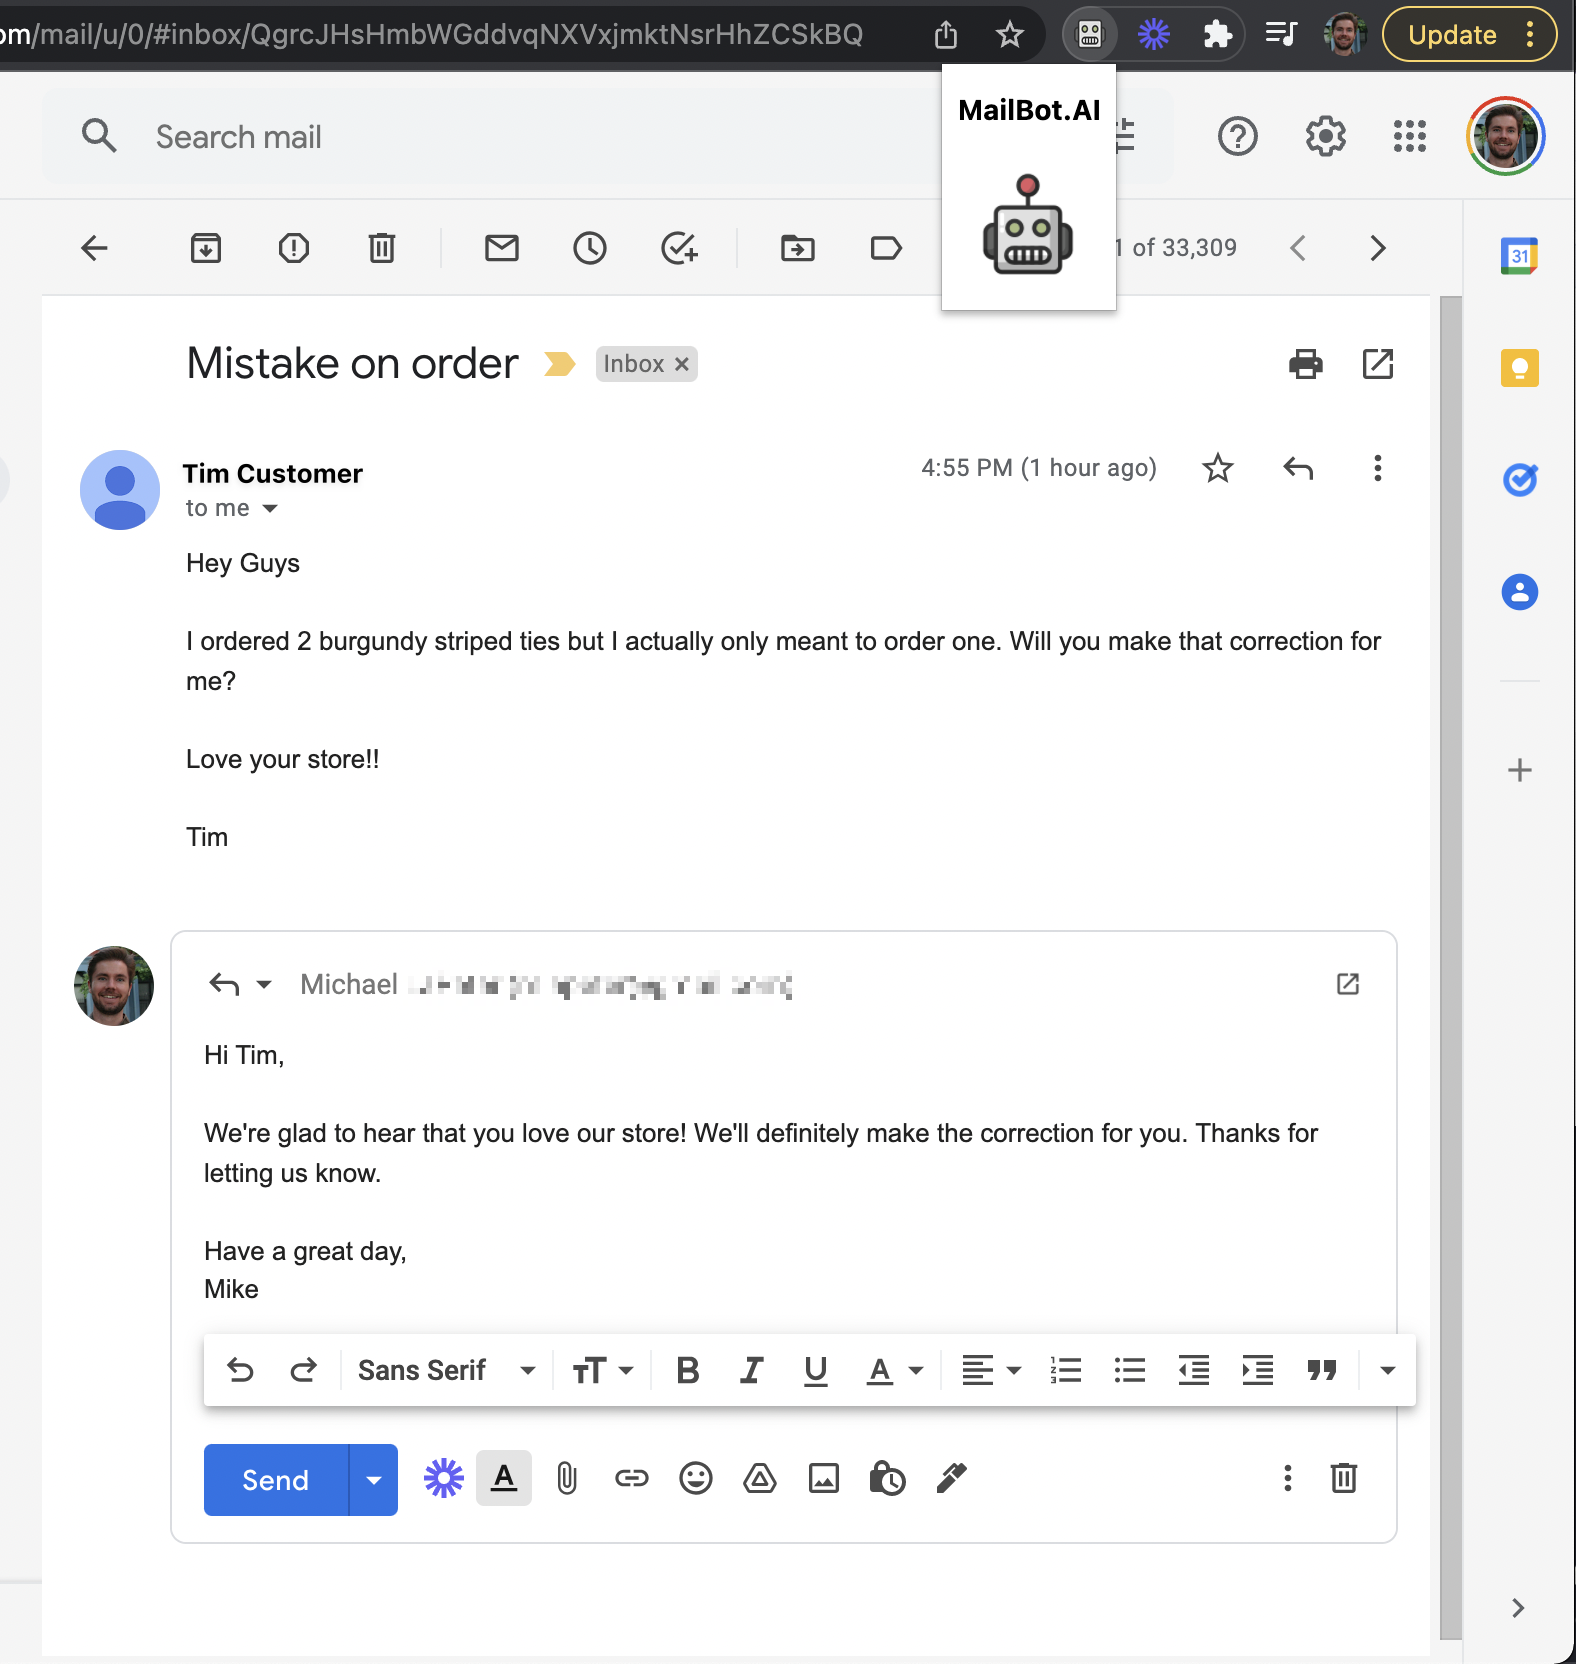 MailBot AI email writing assistant